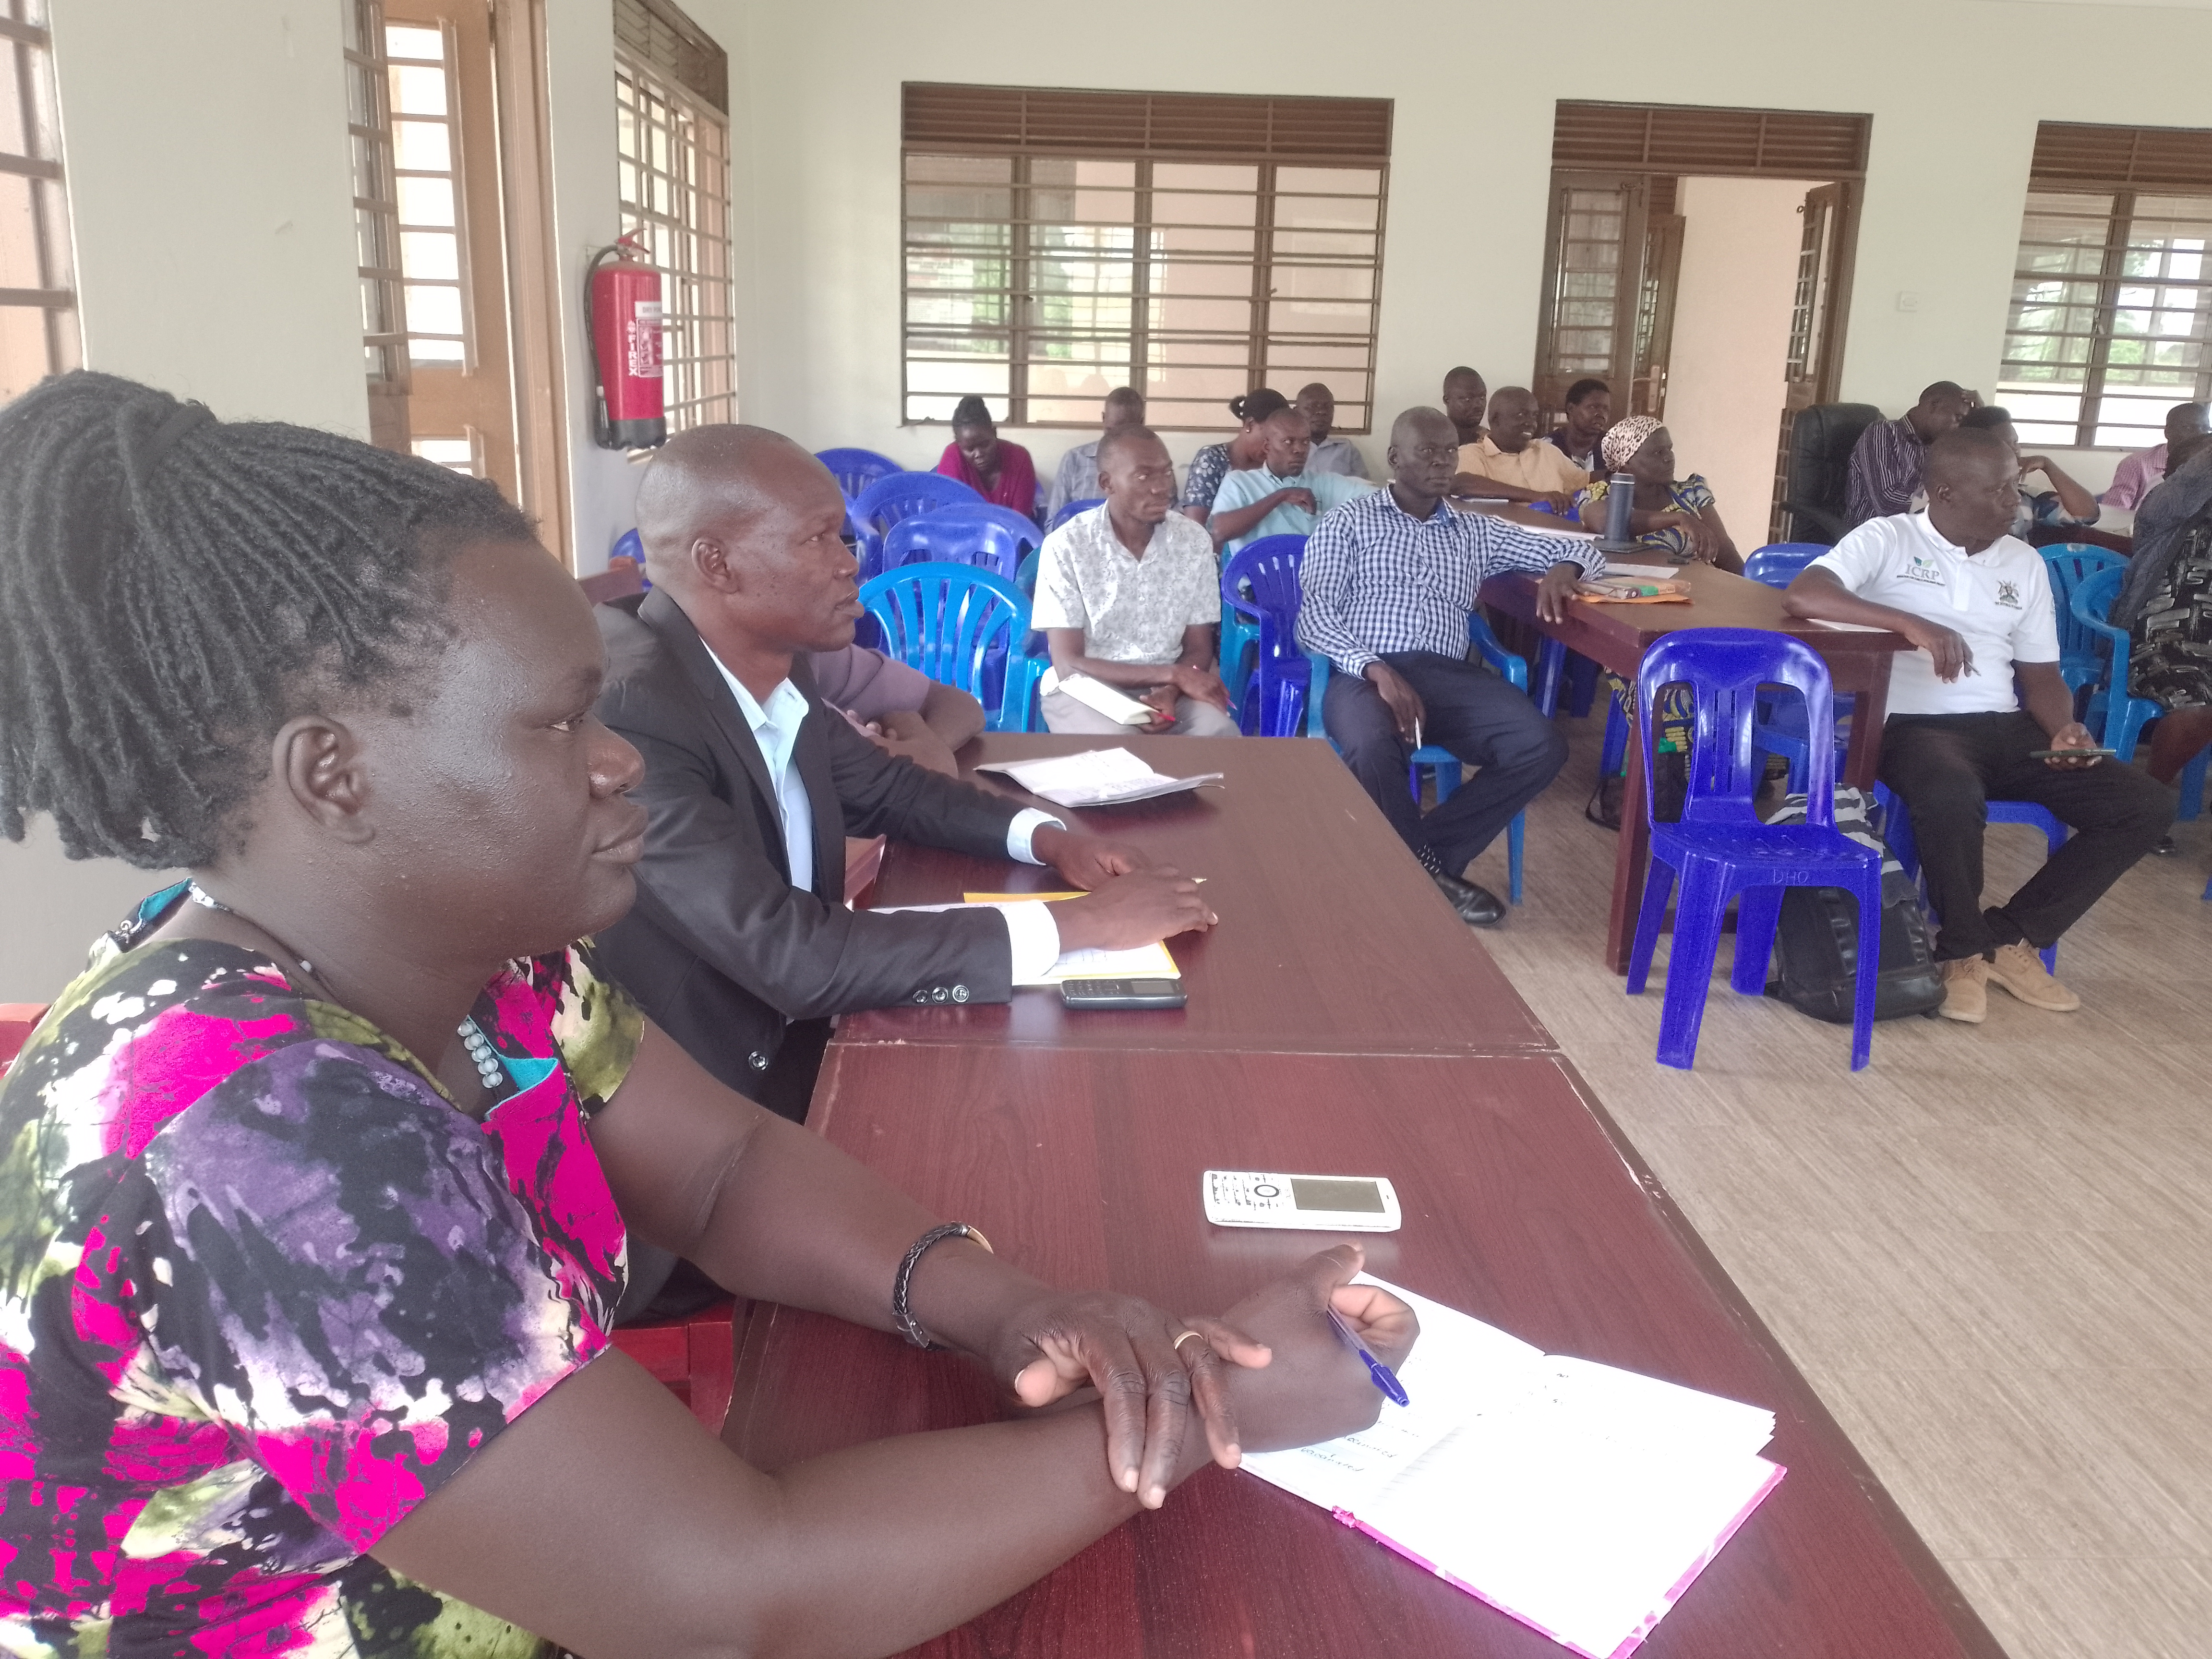 The district holders attending a meeting at the district hall